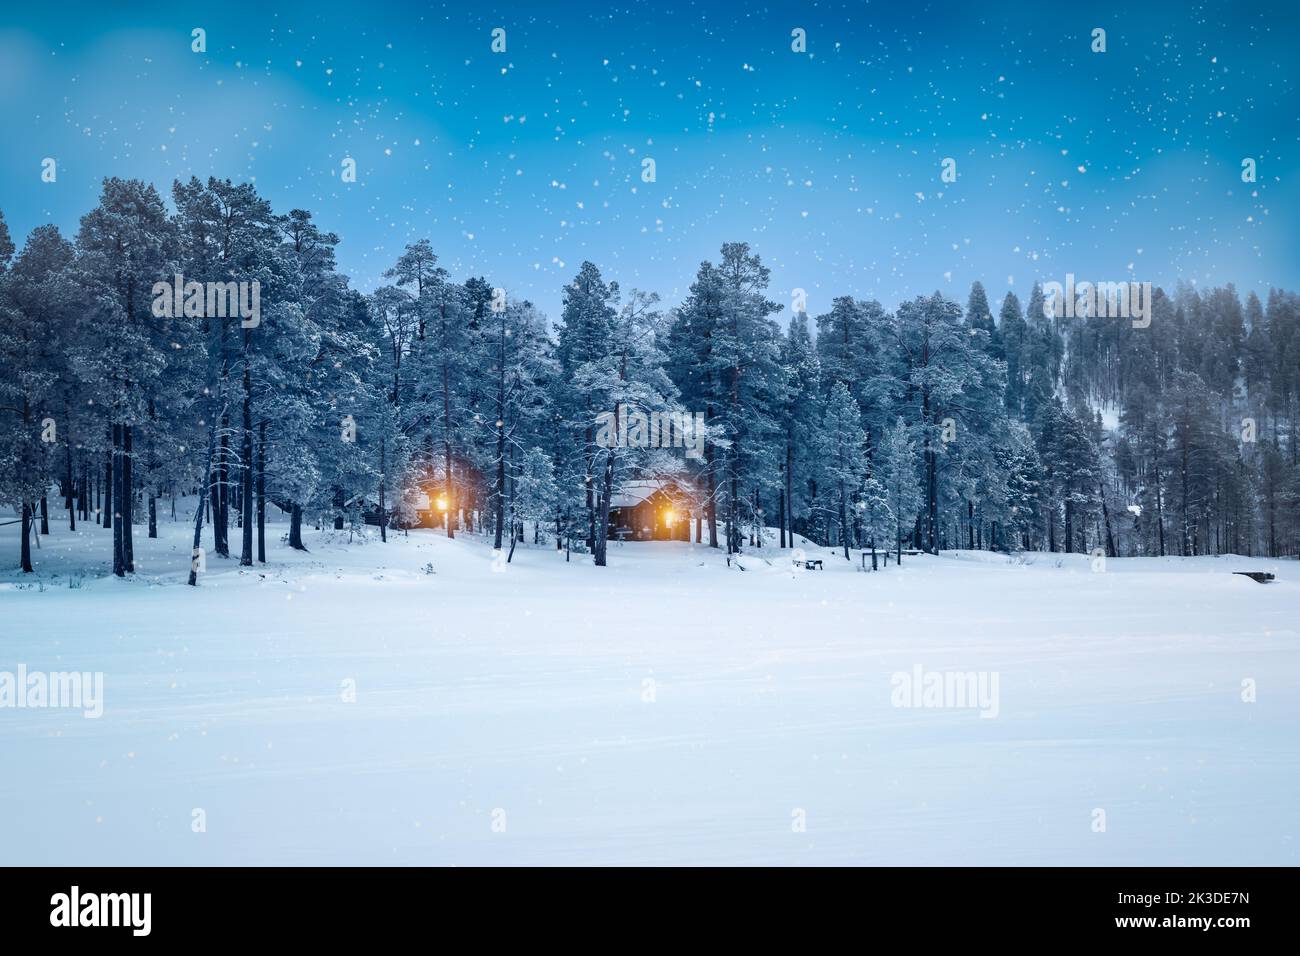 Winter forest snow landscape in the night. Lapland, Finland. Stock Photo